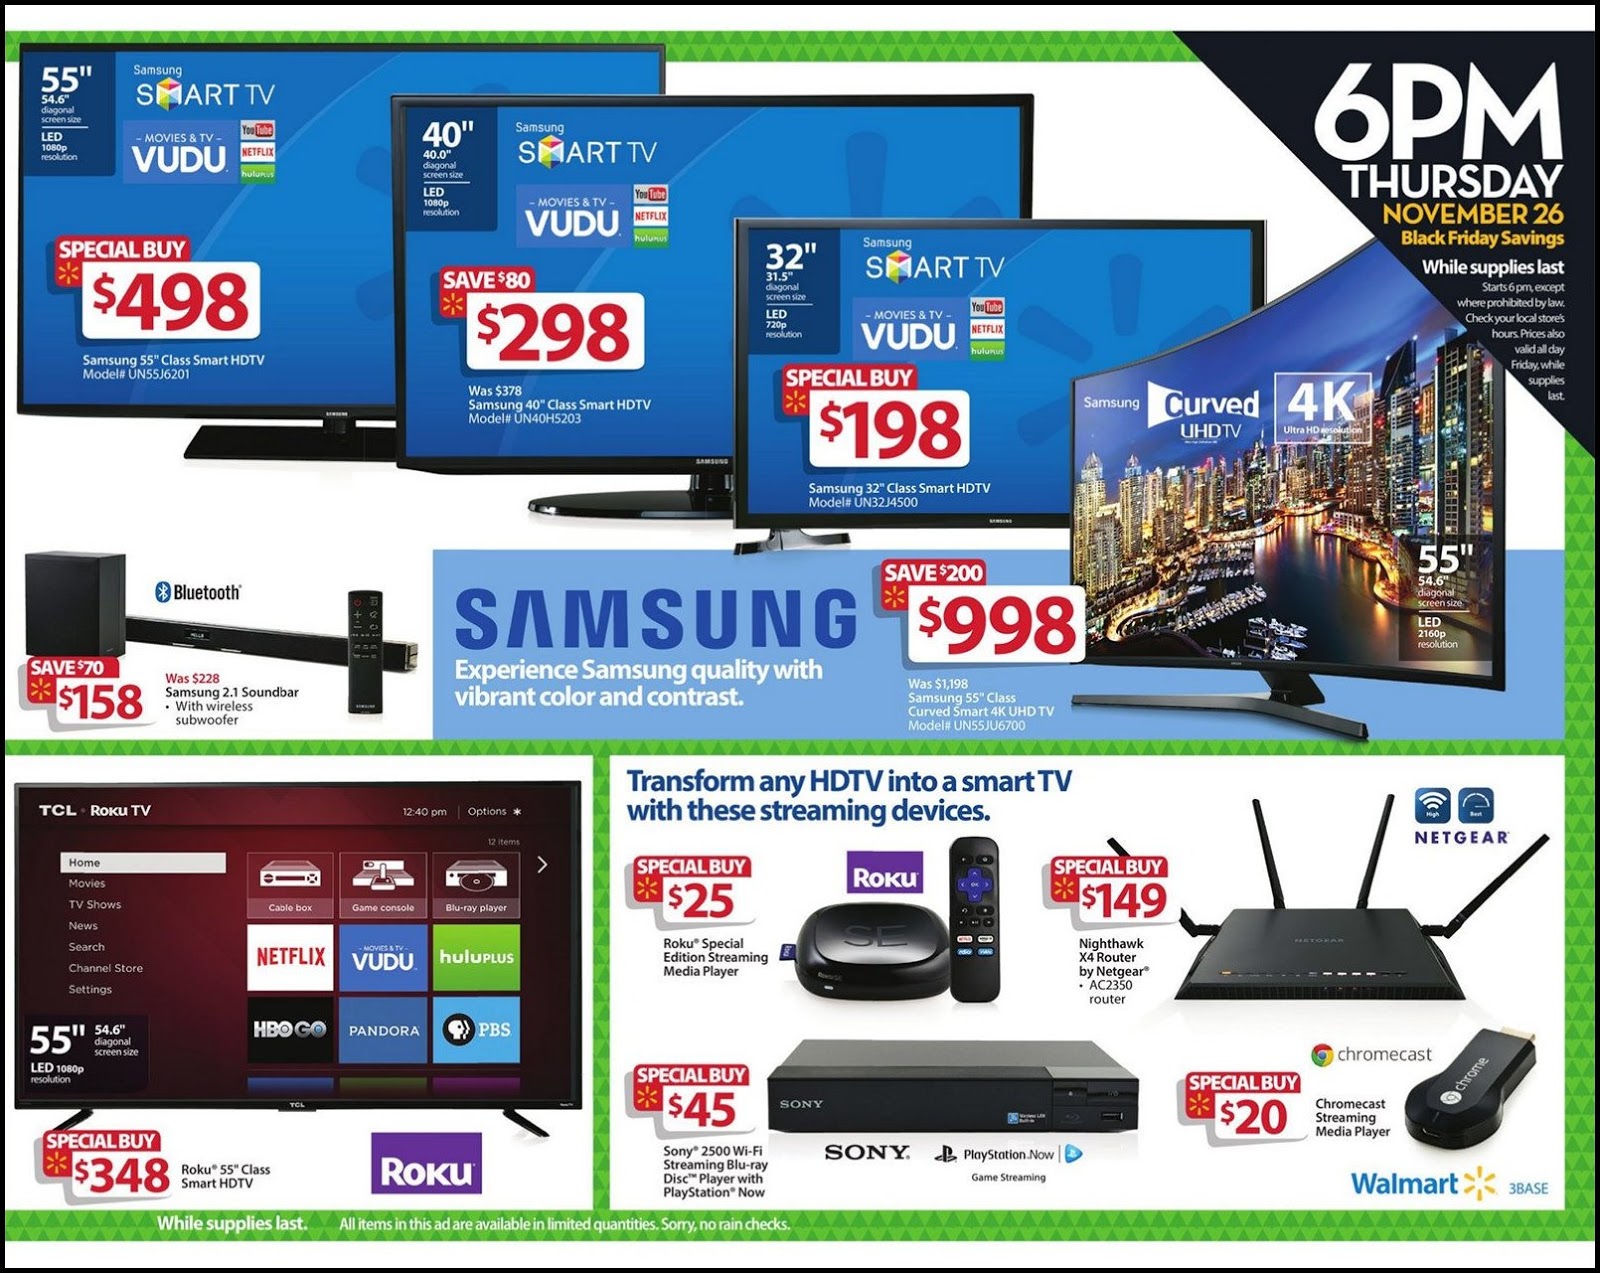 tvs on sale at walmart this weekend - apps technology